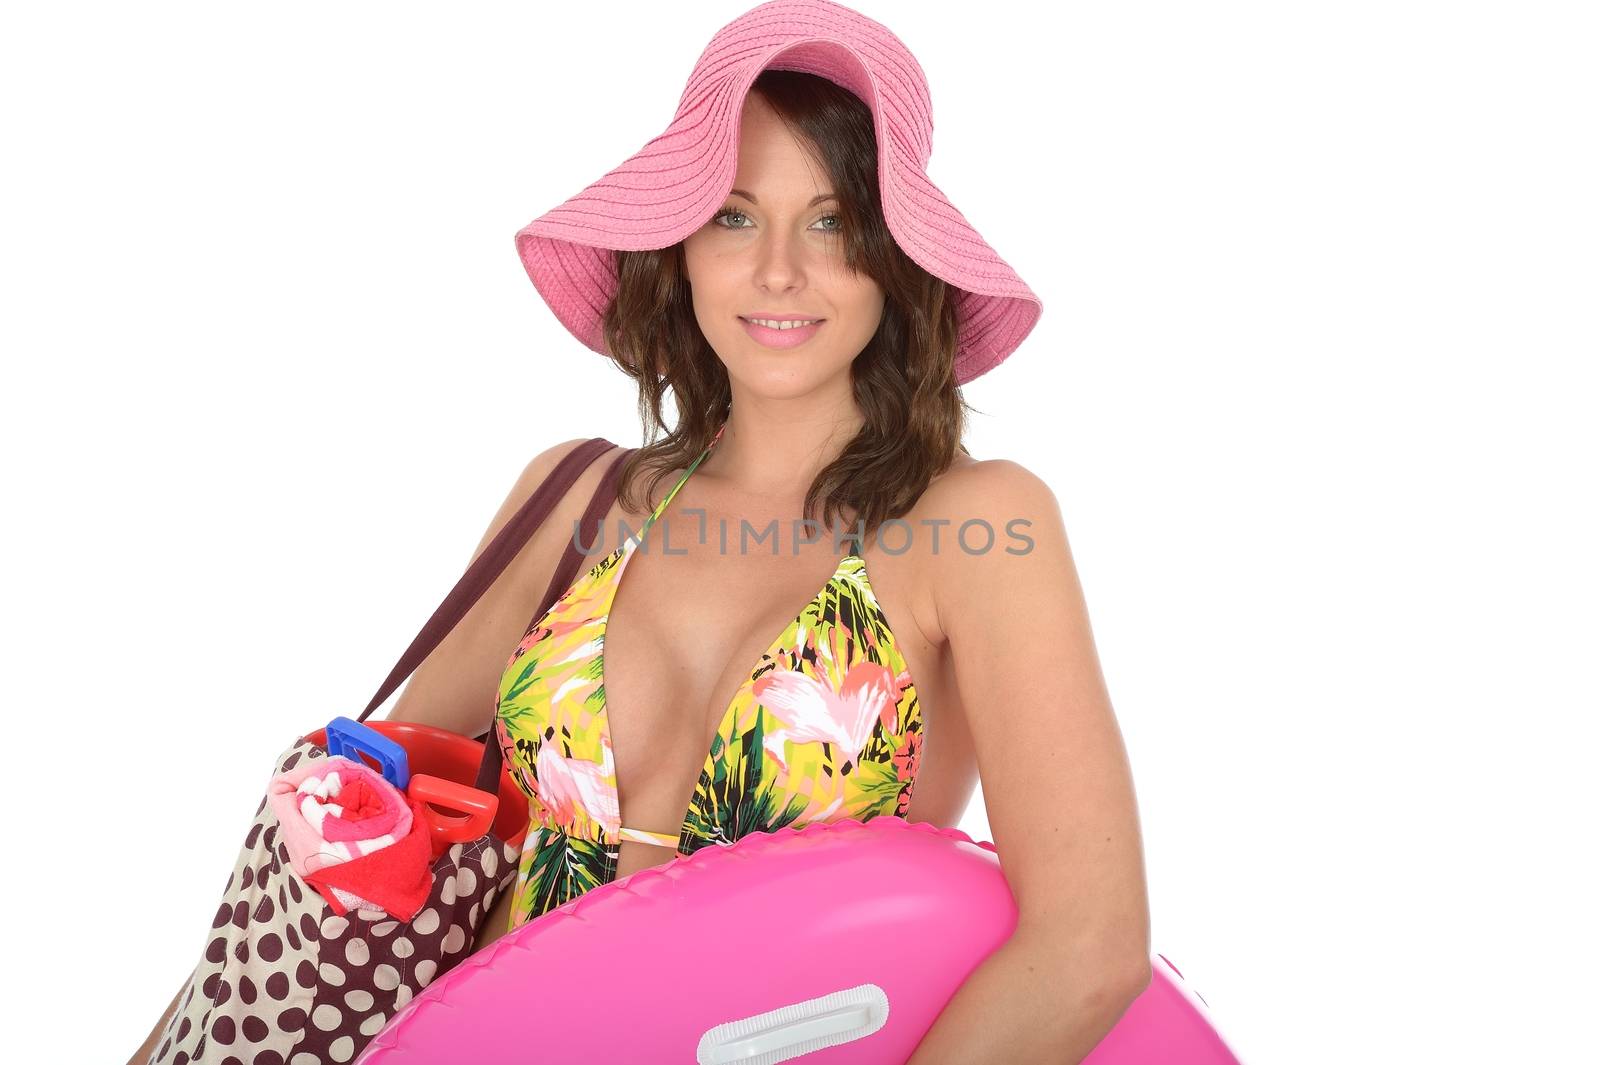 Young Woman Wearing a Swim Suit on Holiday Carrying a  PInk Rubber Ring and Shoulder Bag